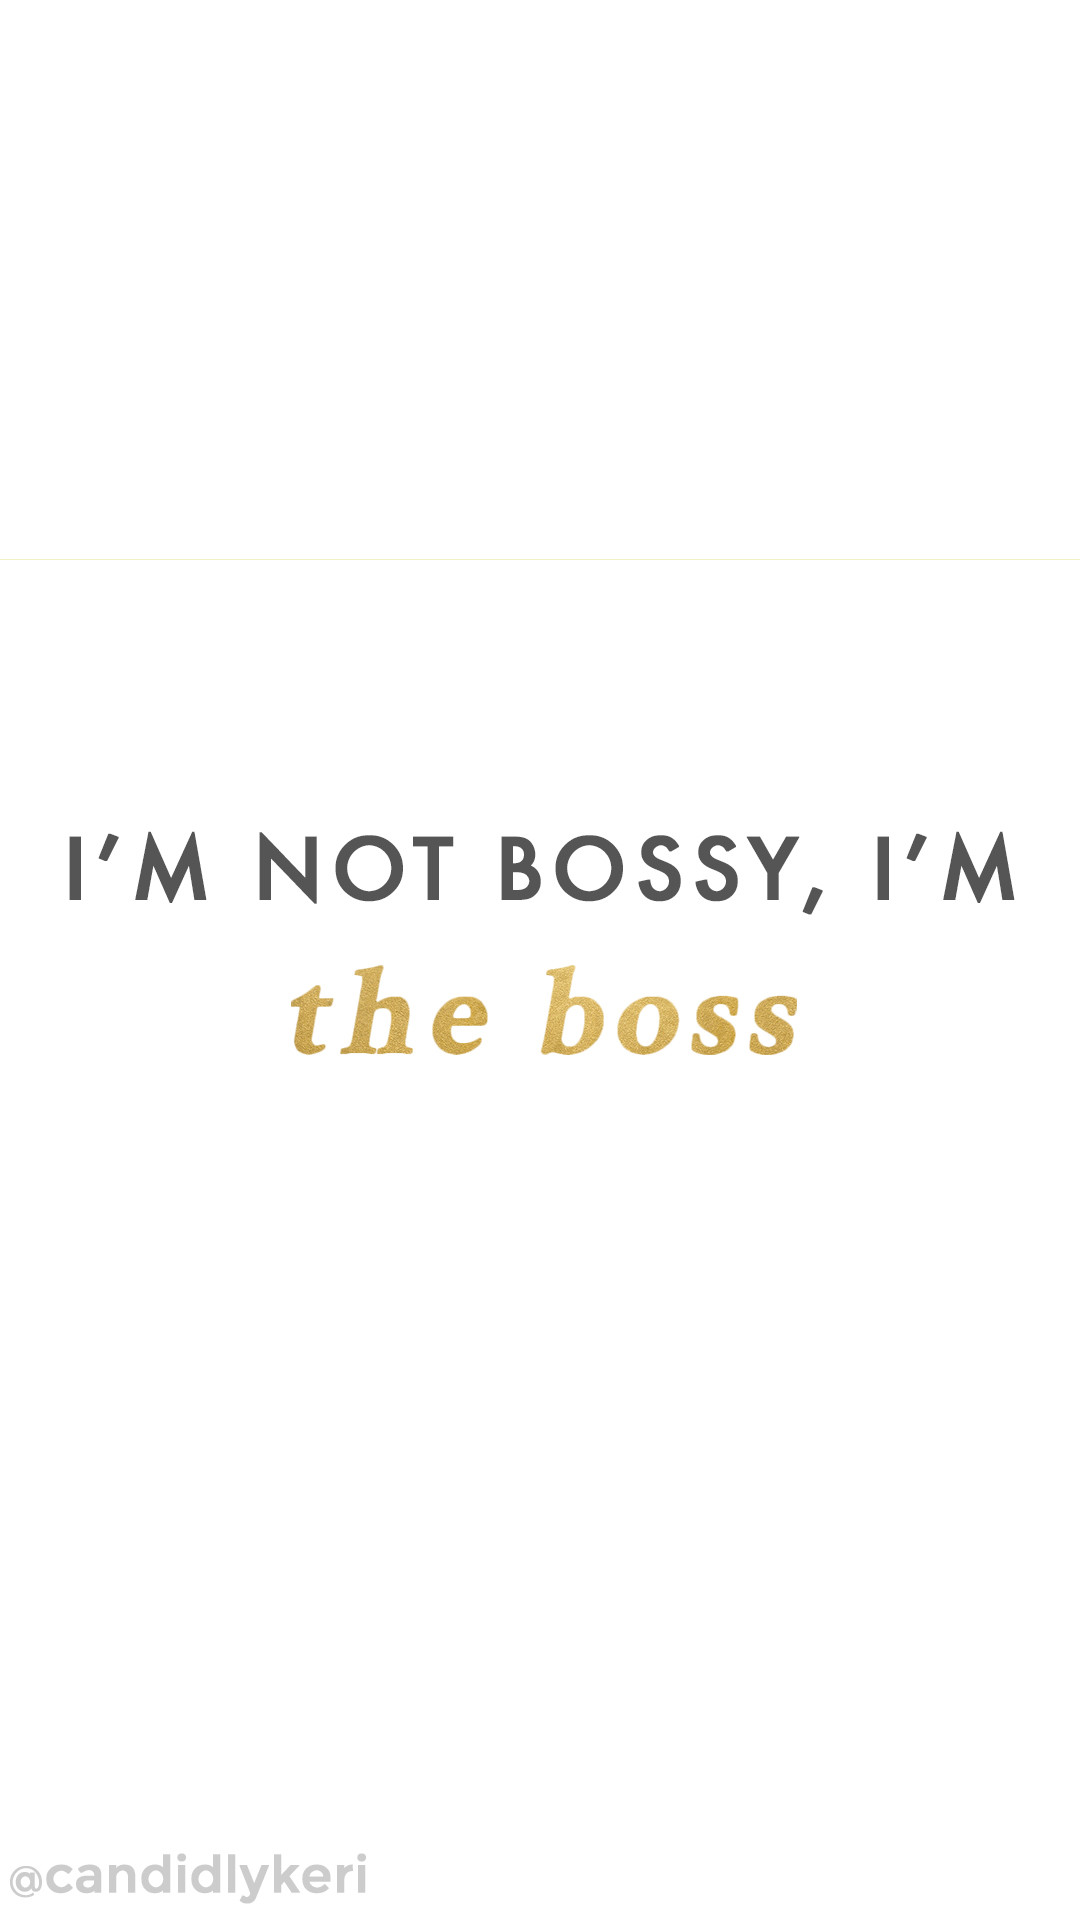 Im not bossy Im the boss gold foil wallpaper you can download for free on the